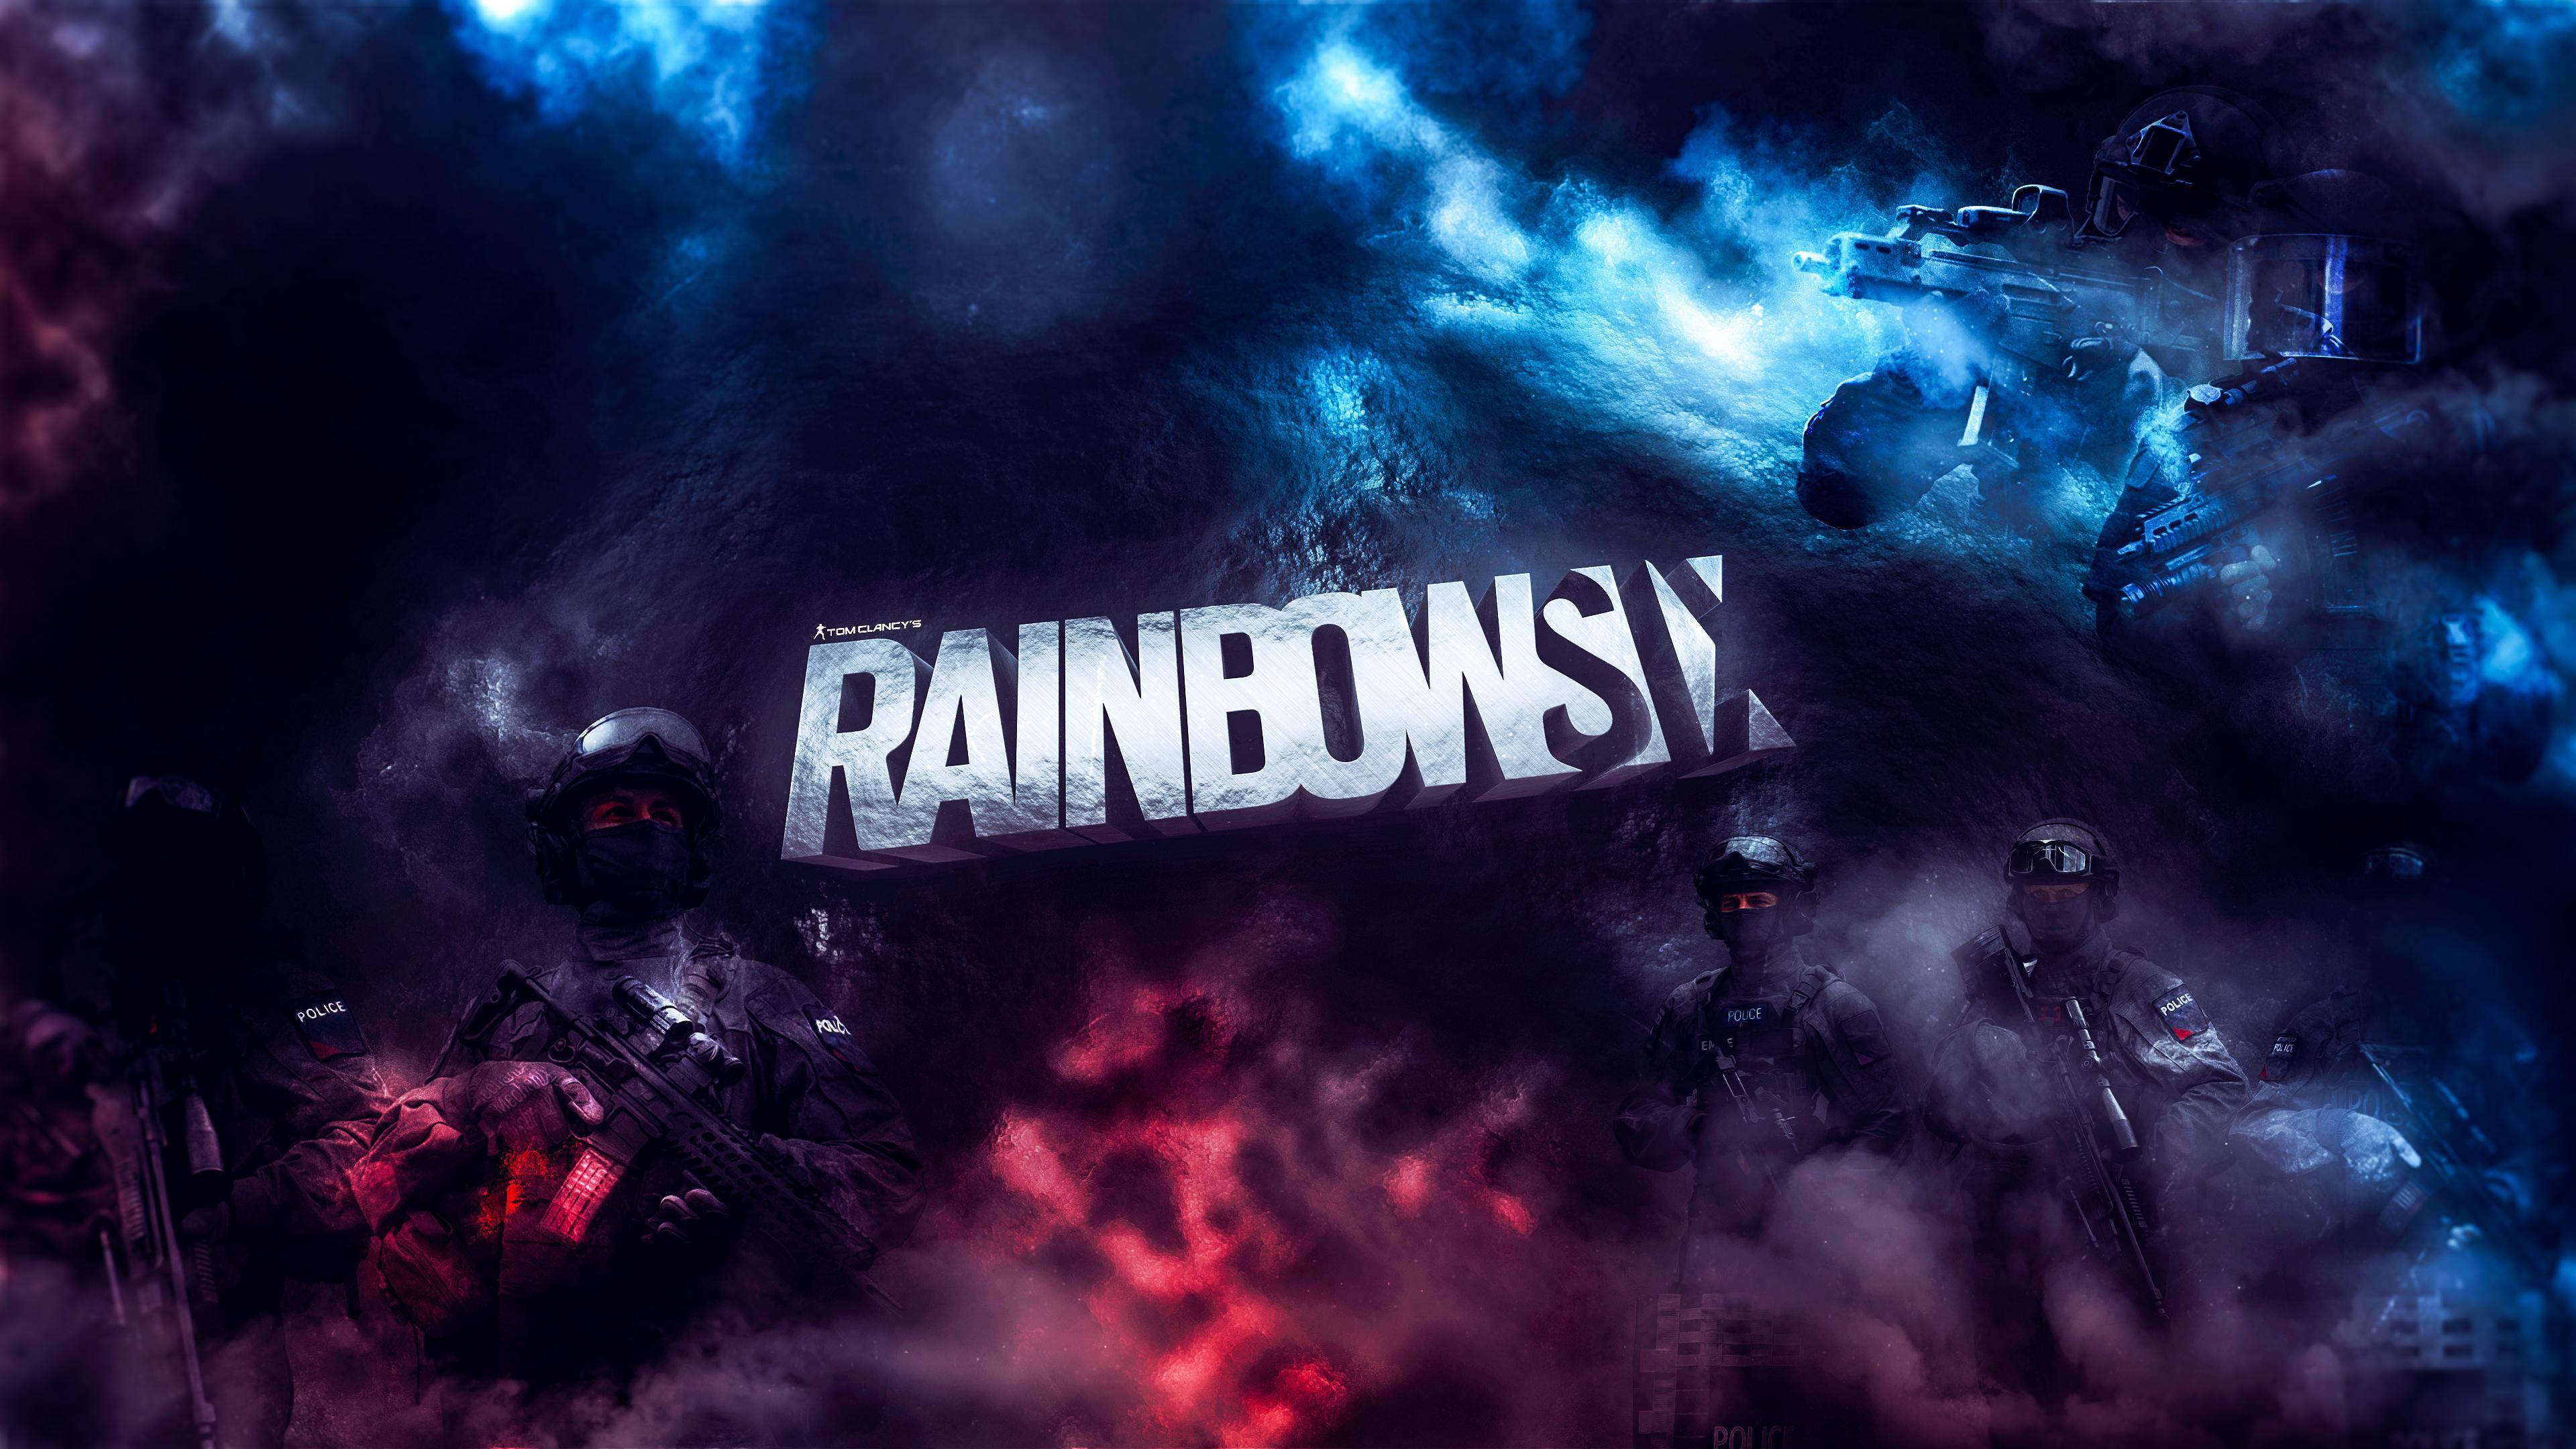 Rainbow Six Siege Wallpaper.GiftWatches.CO